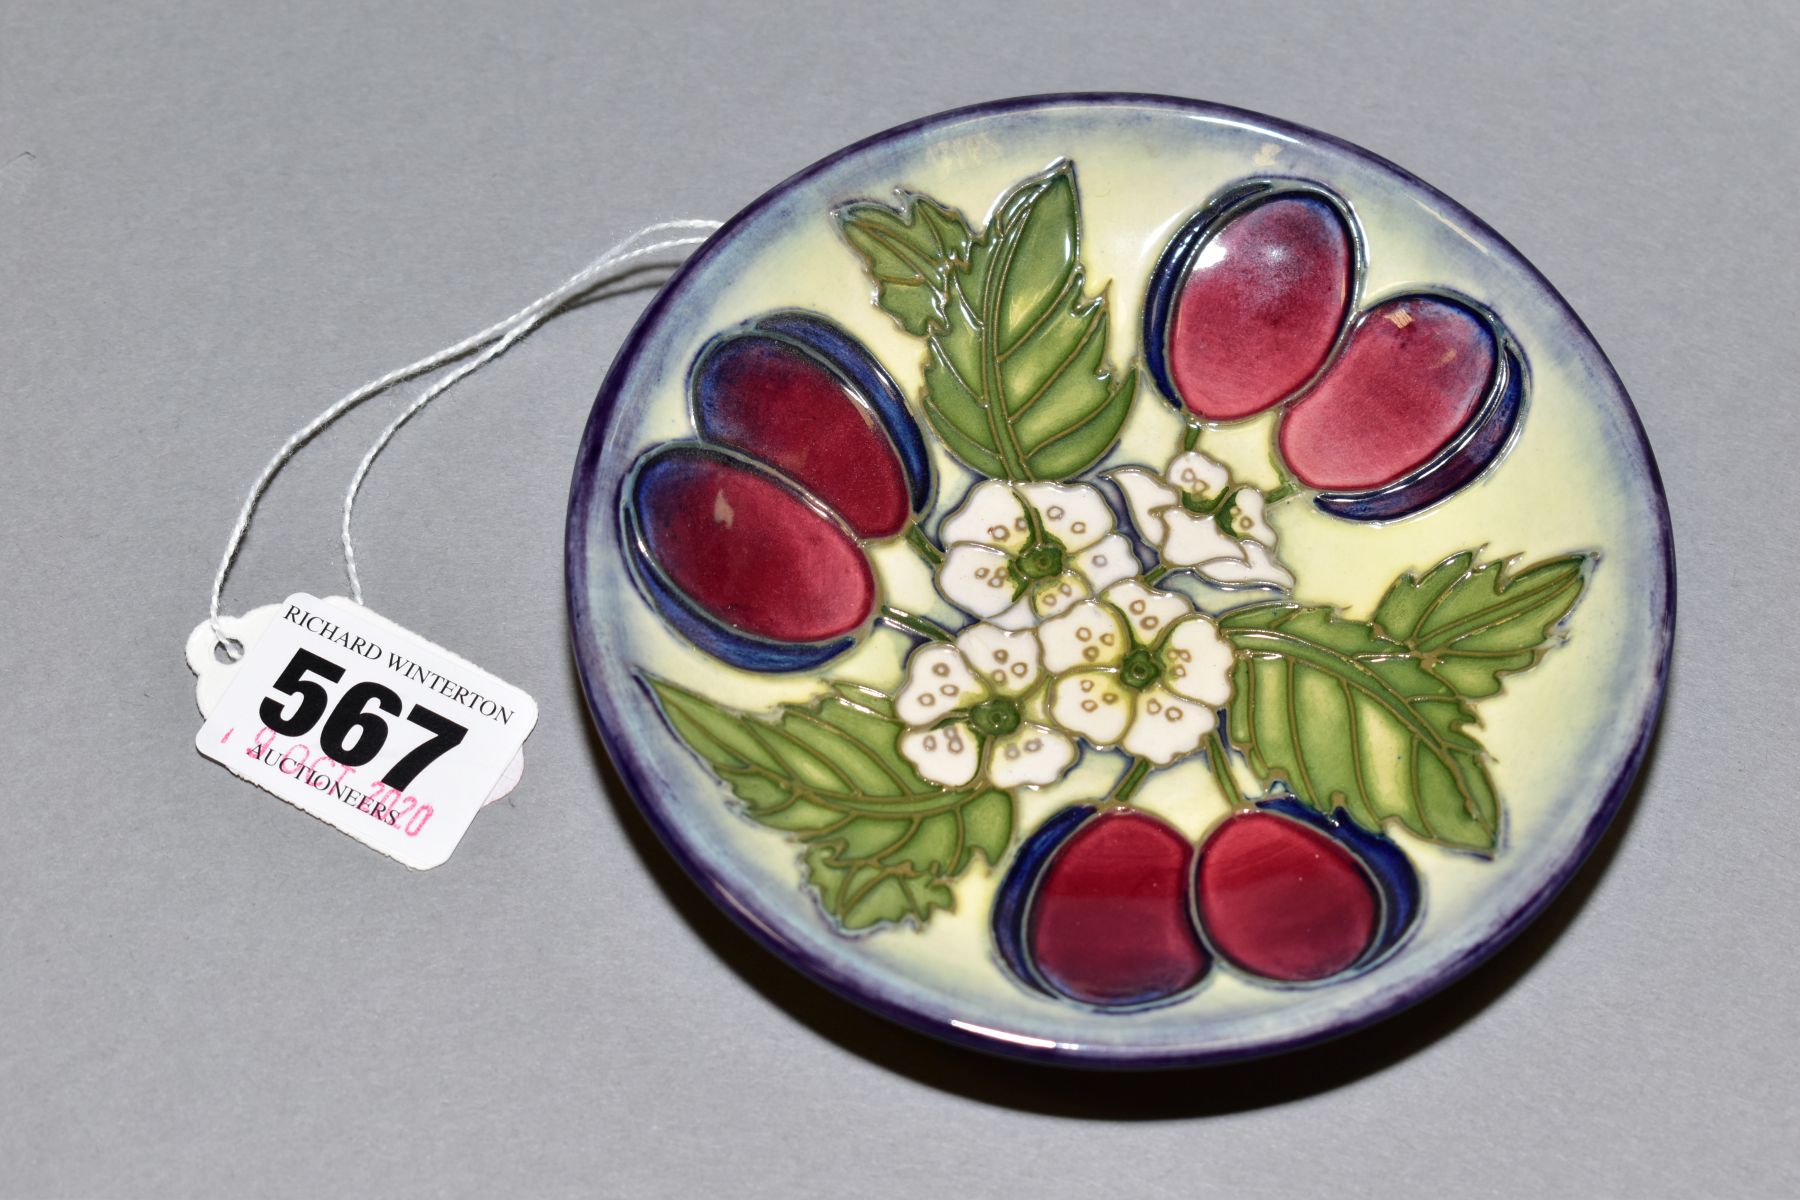 A MOORCROFT CIRCULAR COASTER DECORATED IN THE PLUMS AND BLOSSOM PATTERN, marked with 'T' as a